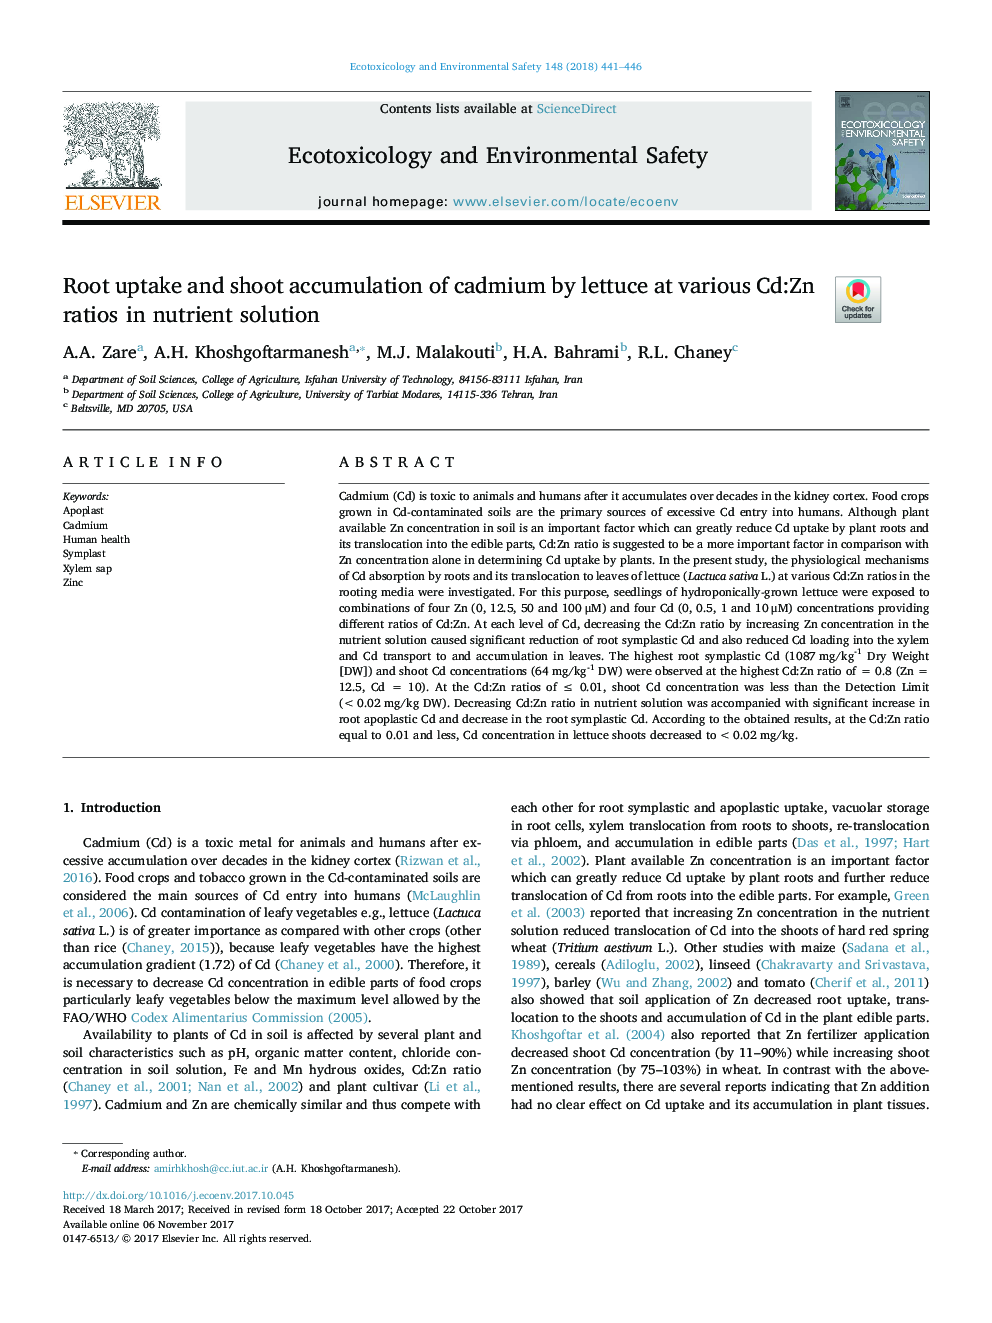 Root uptake and shoot accumulation of cadmium by lettuce at various Cd:Zn ratios in nutrient solution